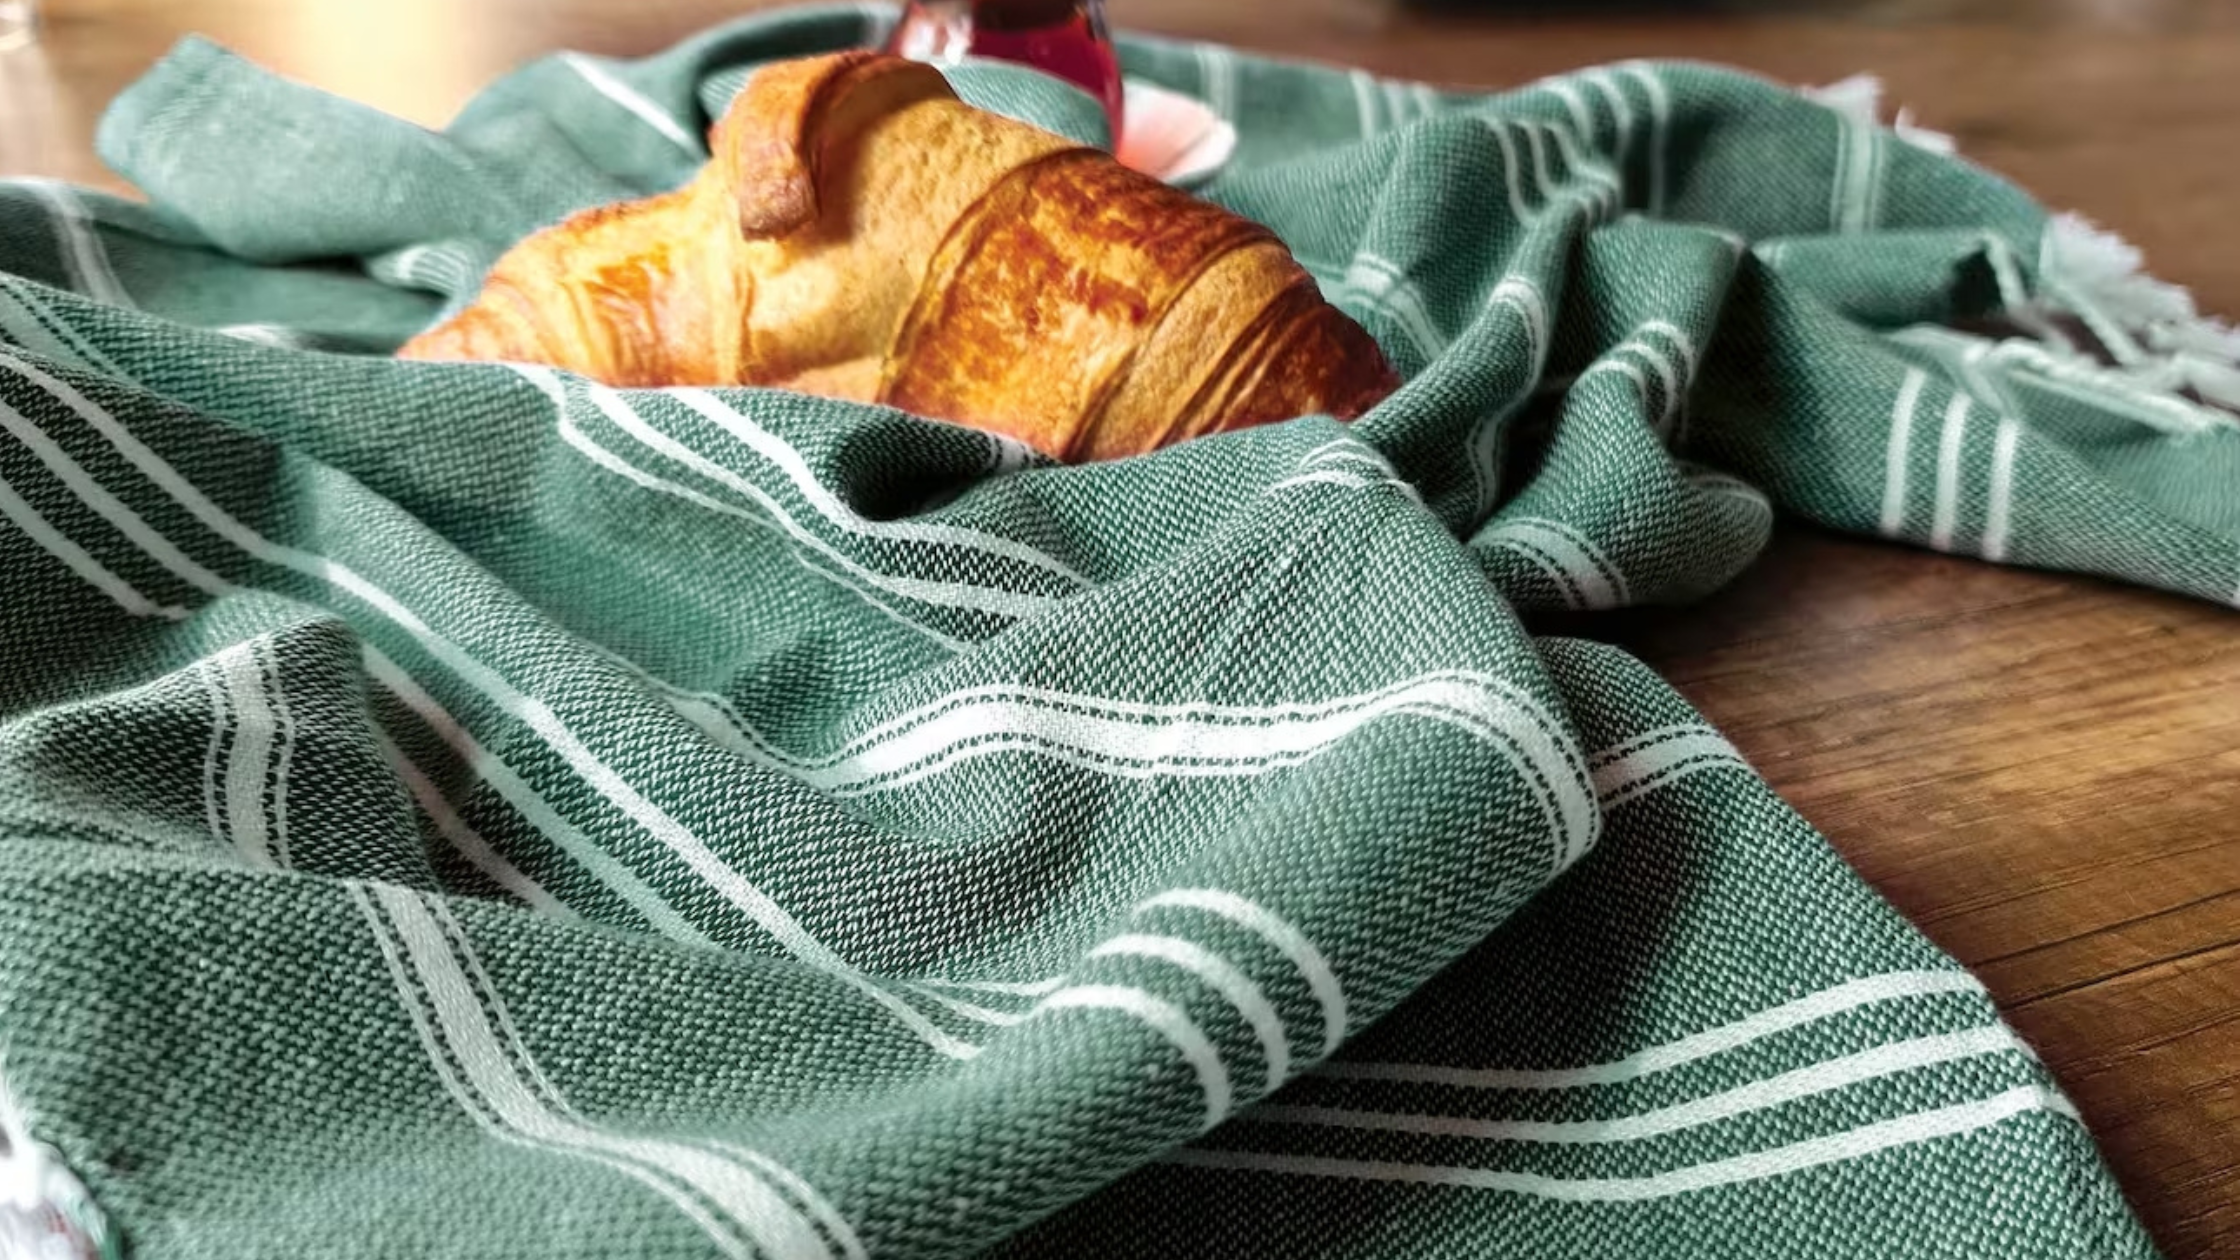 Frequently asked questions about Turkish kitchen towels – Turkish